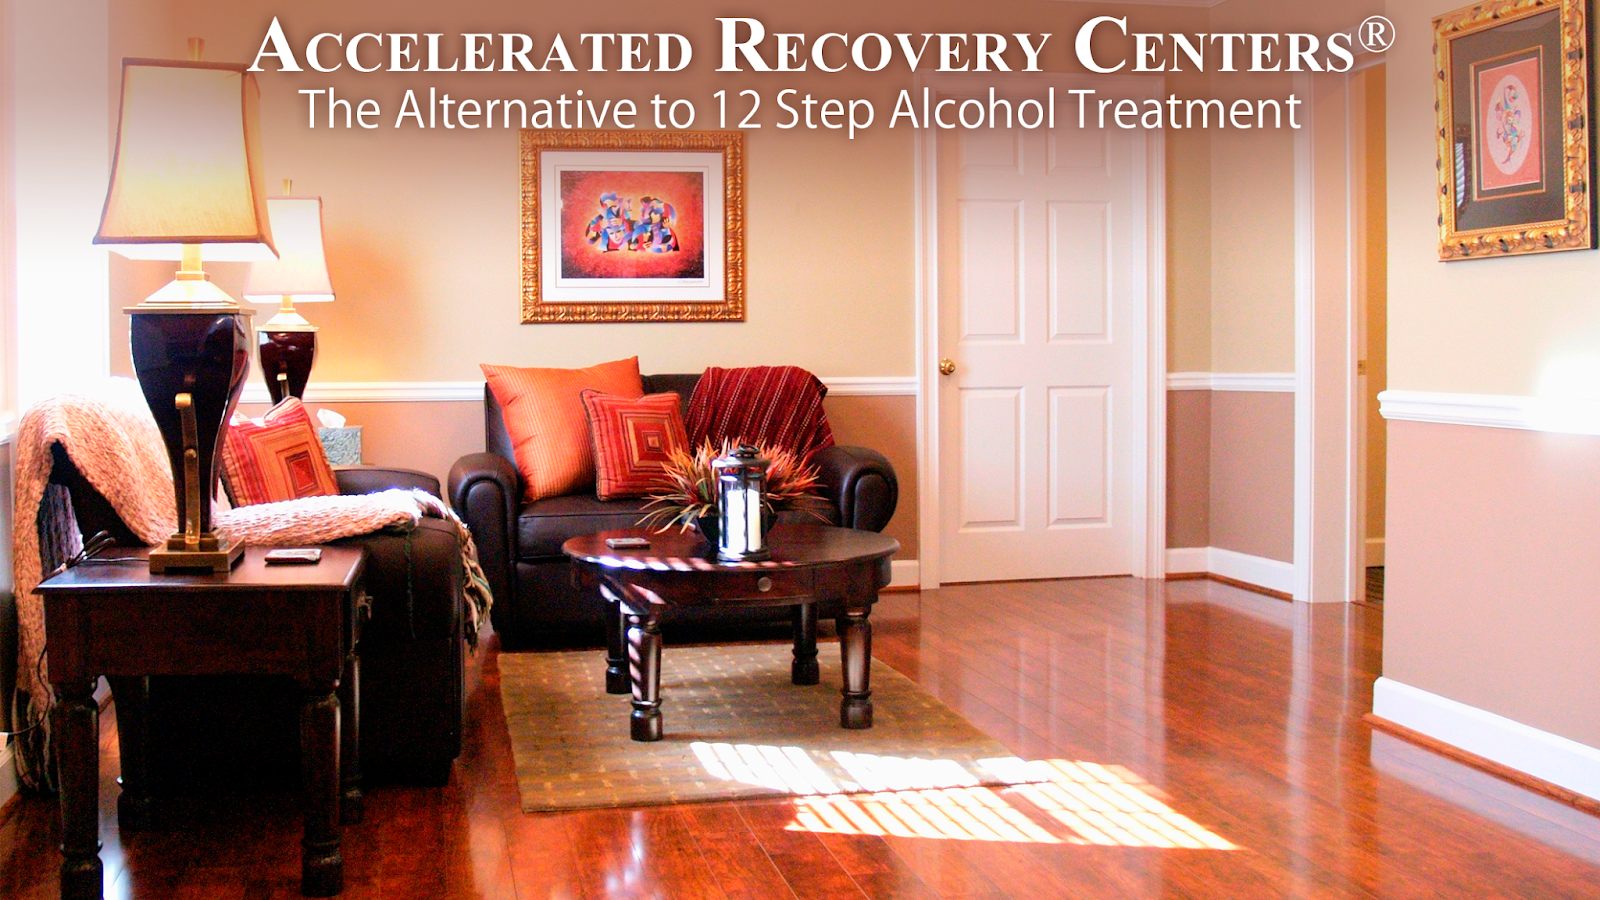 Accelerated Recovery Centers